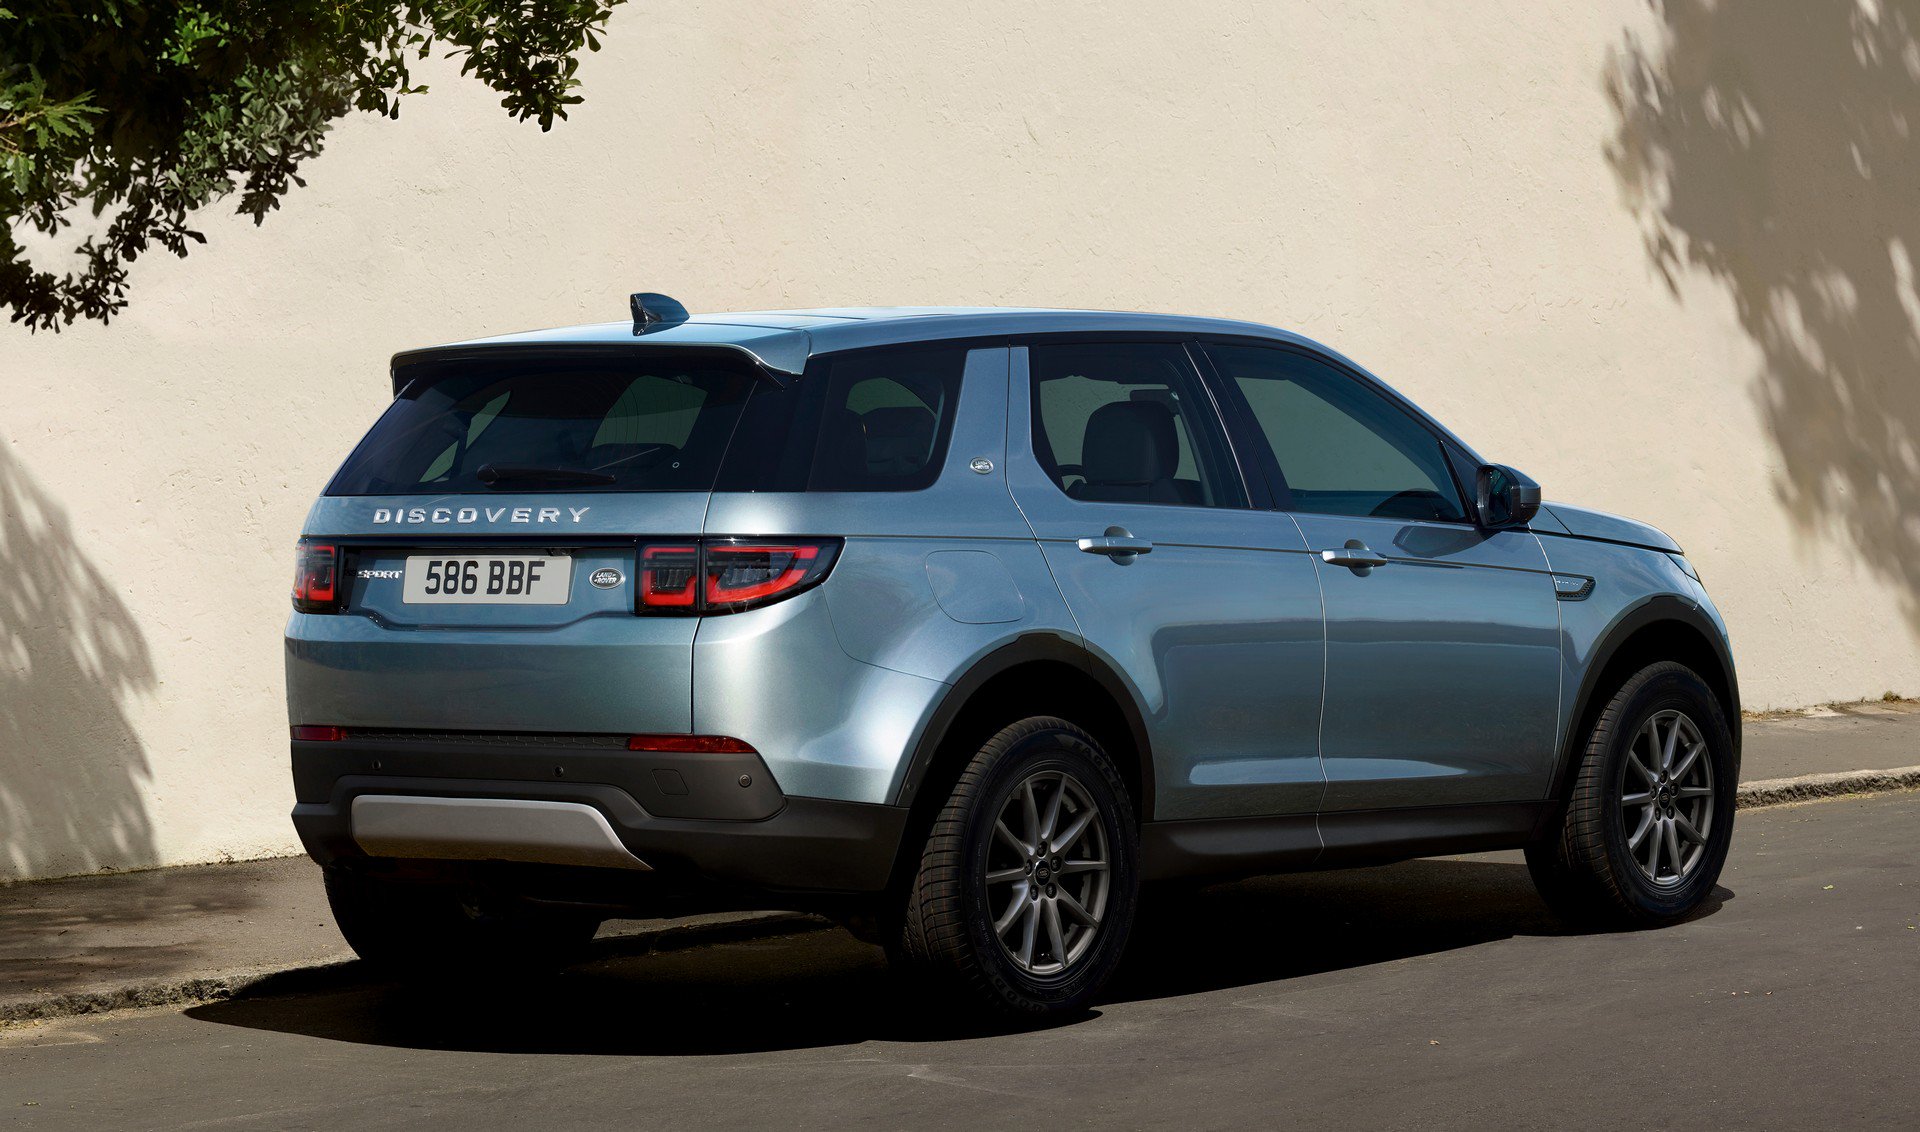 2020 Land Rover Discovery Sport Gets Mild Hybrid System From Range Rover Evoque 25 